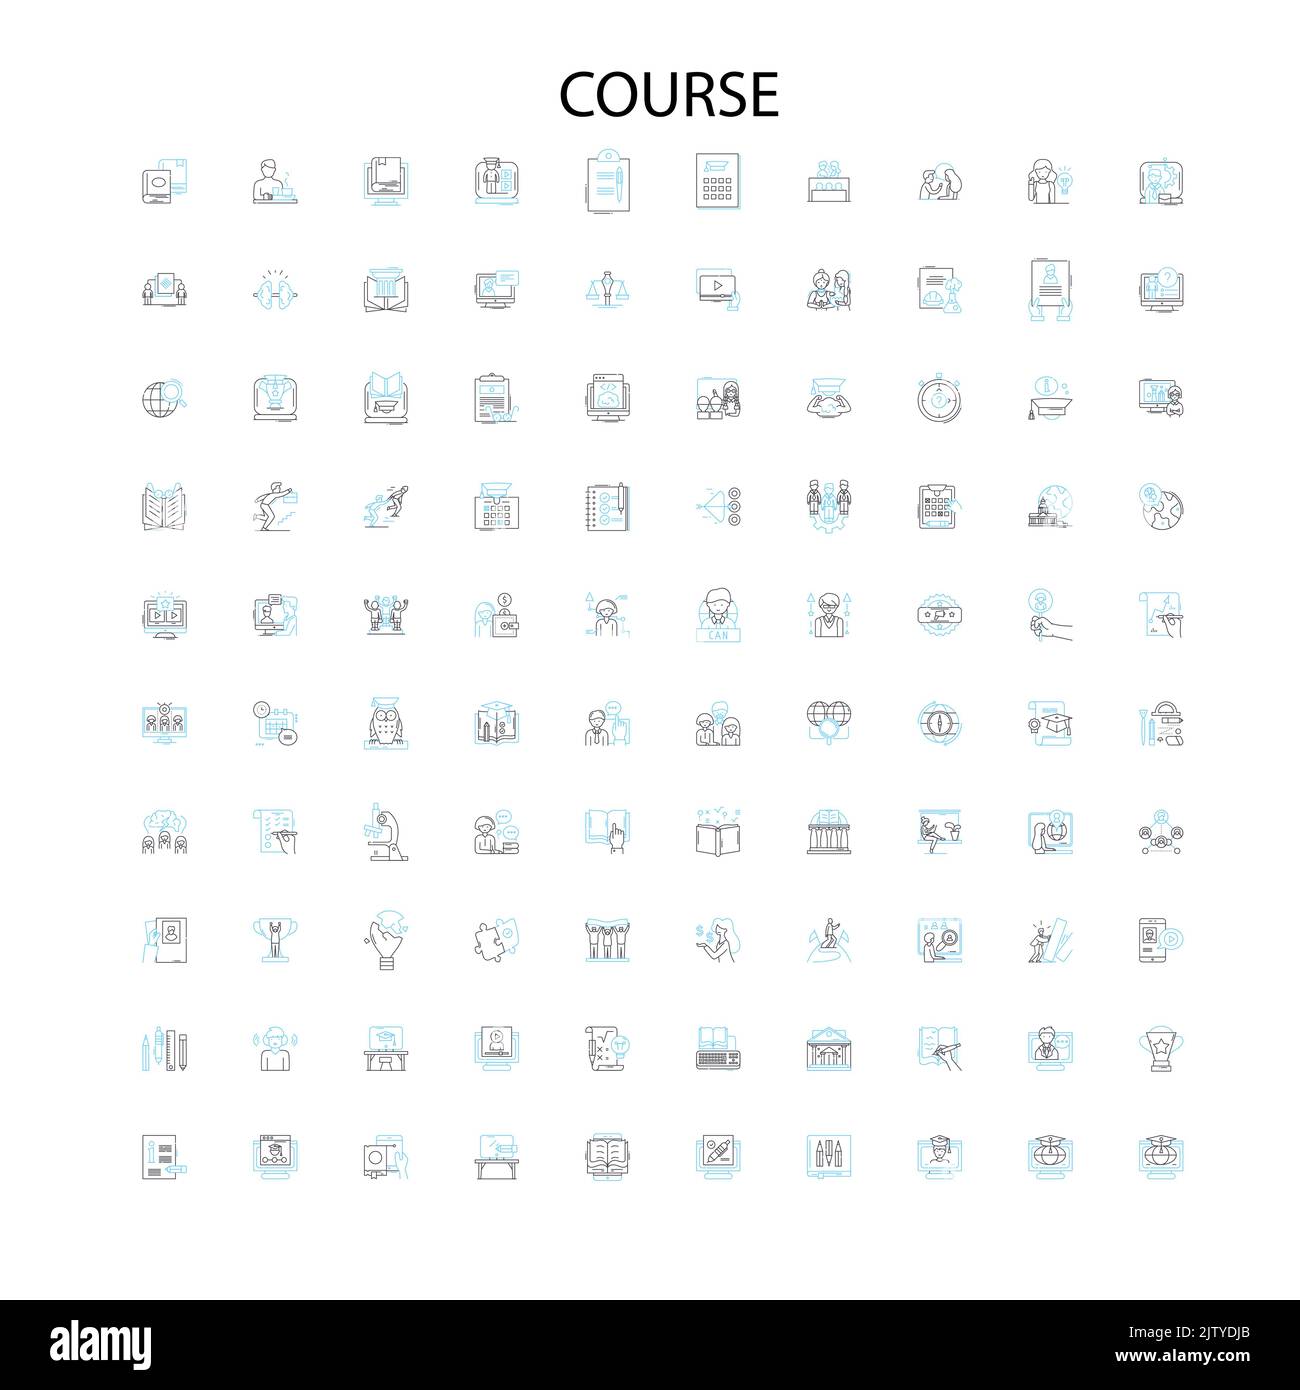 course icons, signs, outline symbols, concept linear illustration line collection Stock Vector